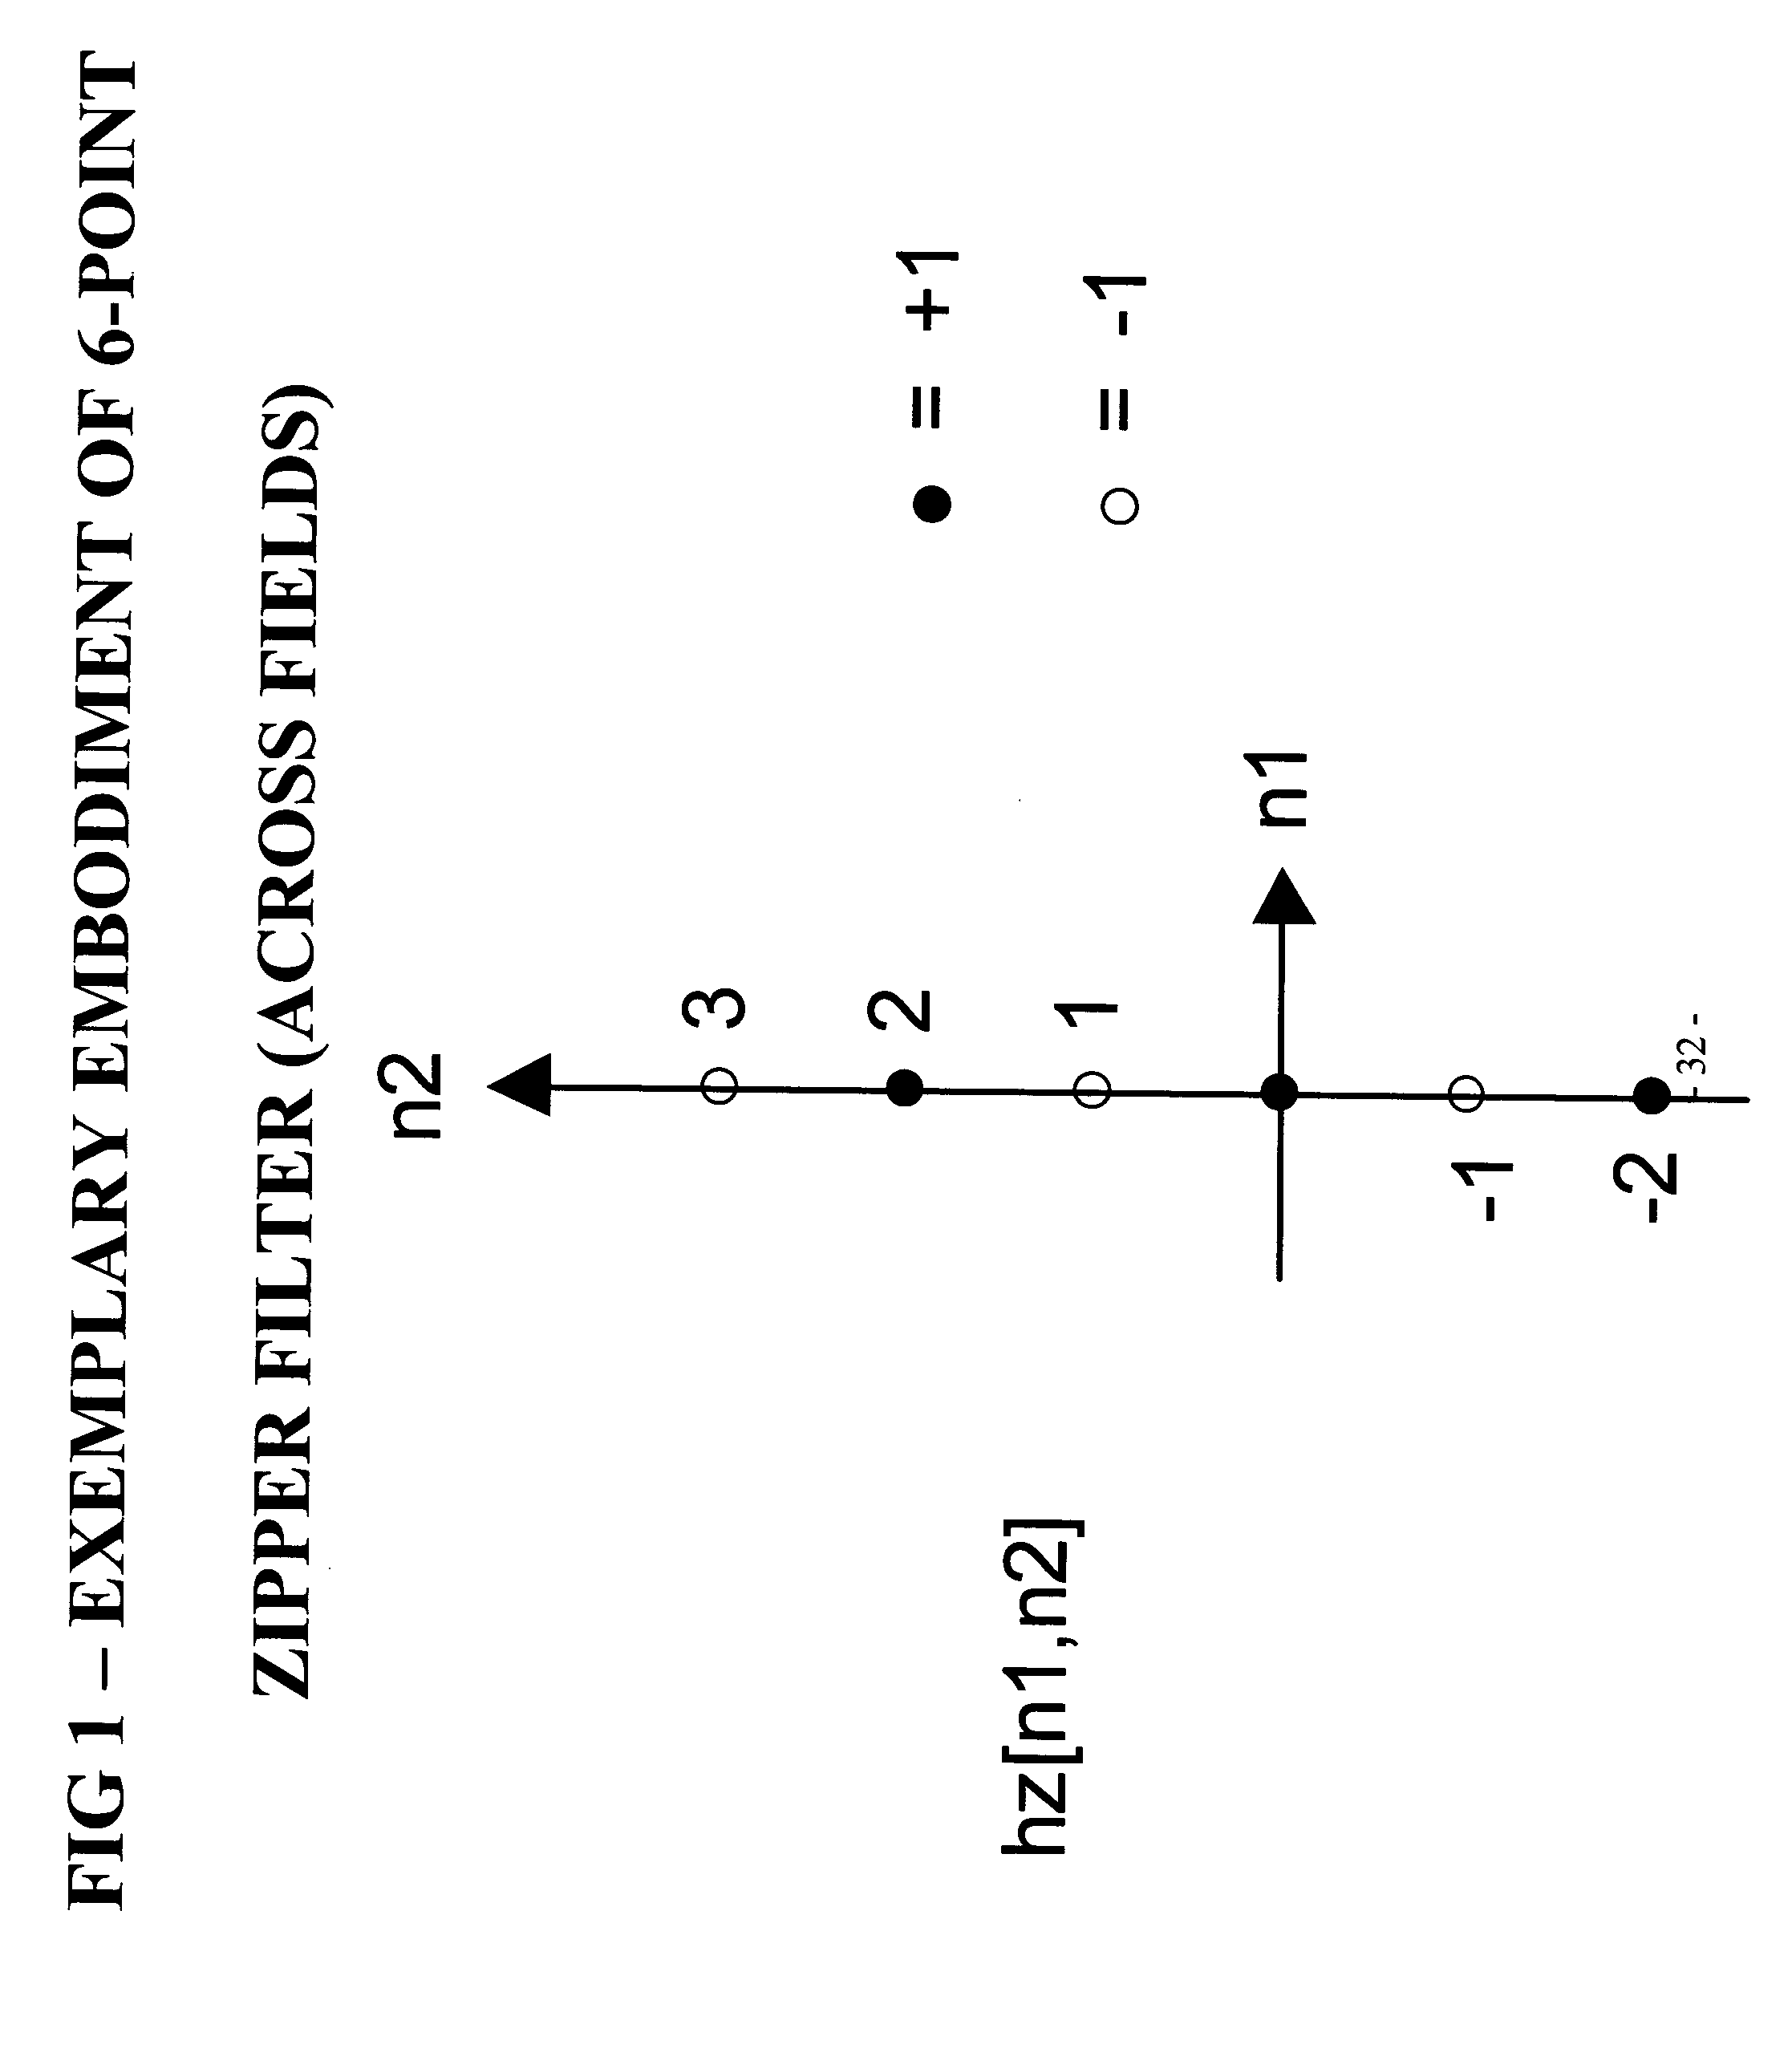 Method for detecting interlaced material and field order